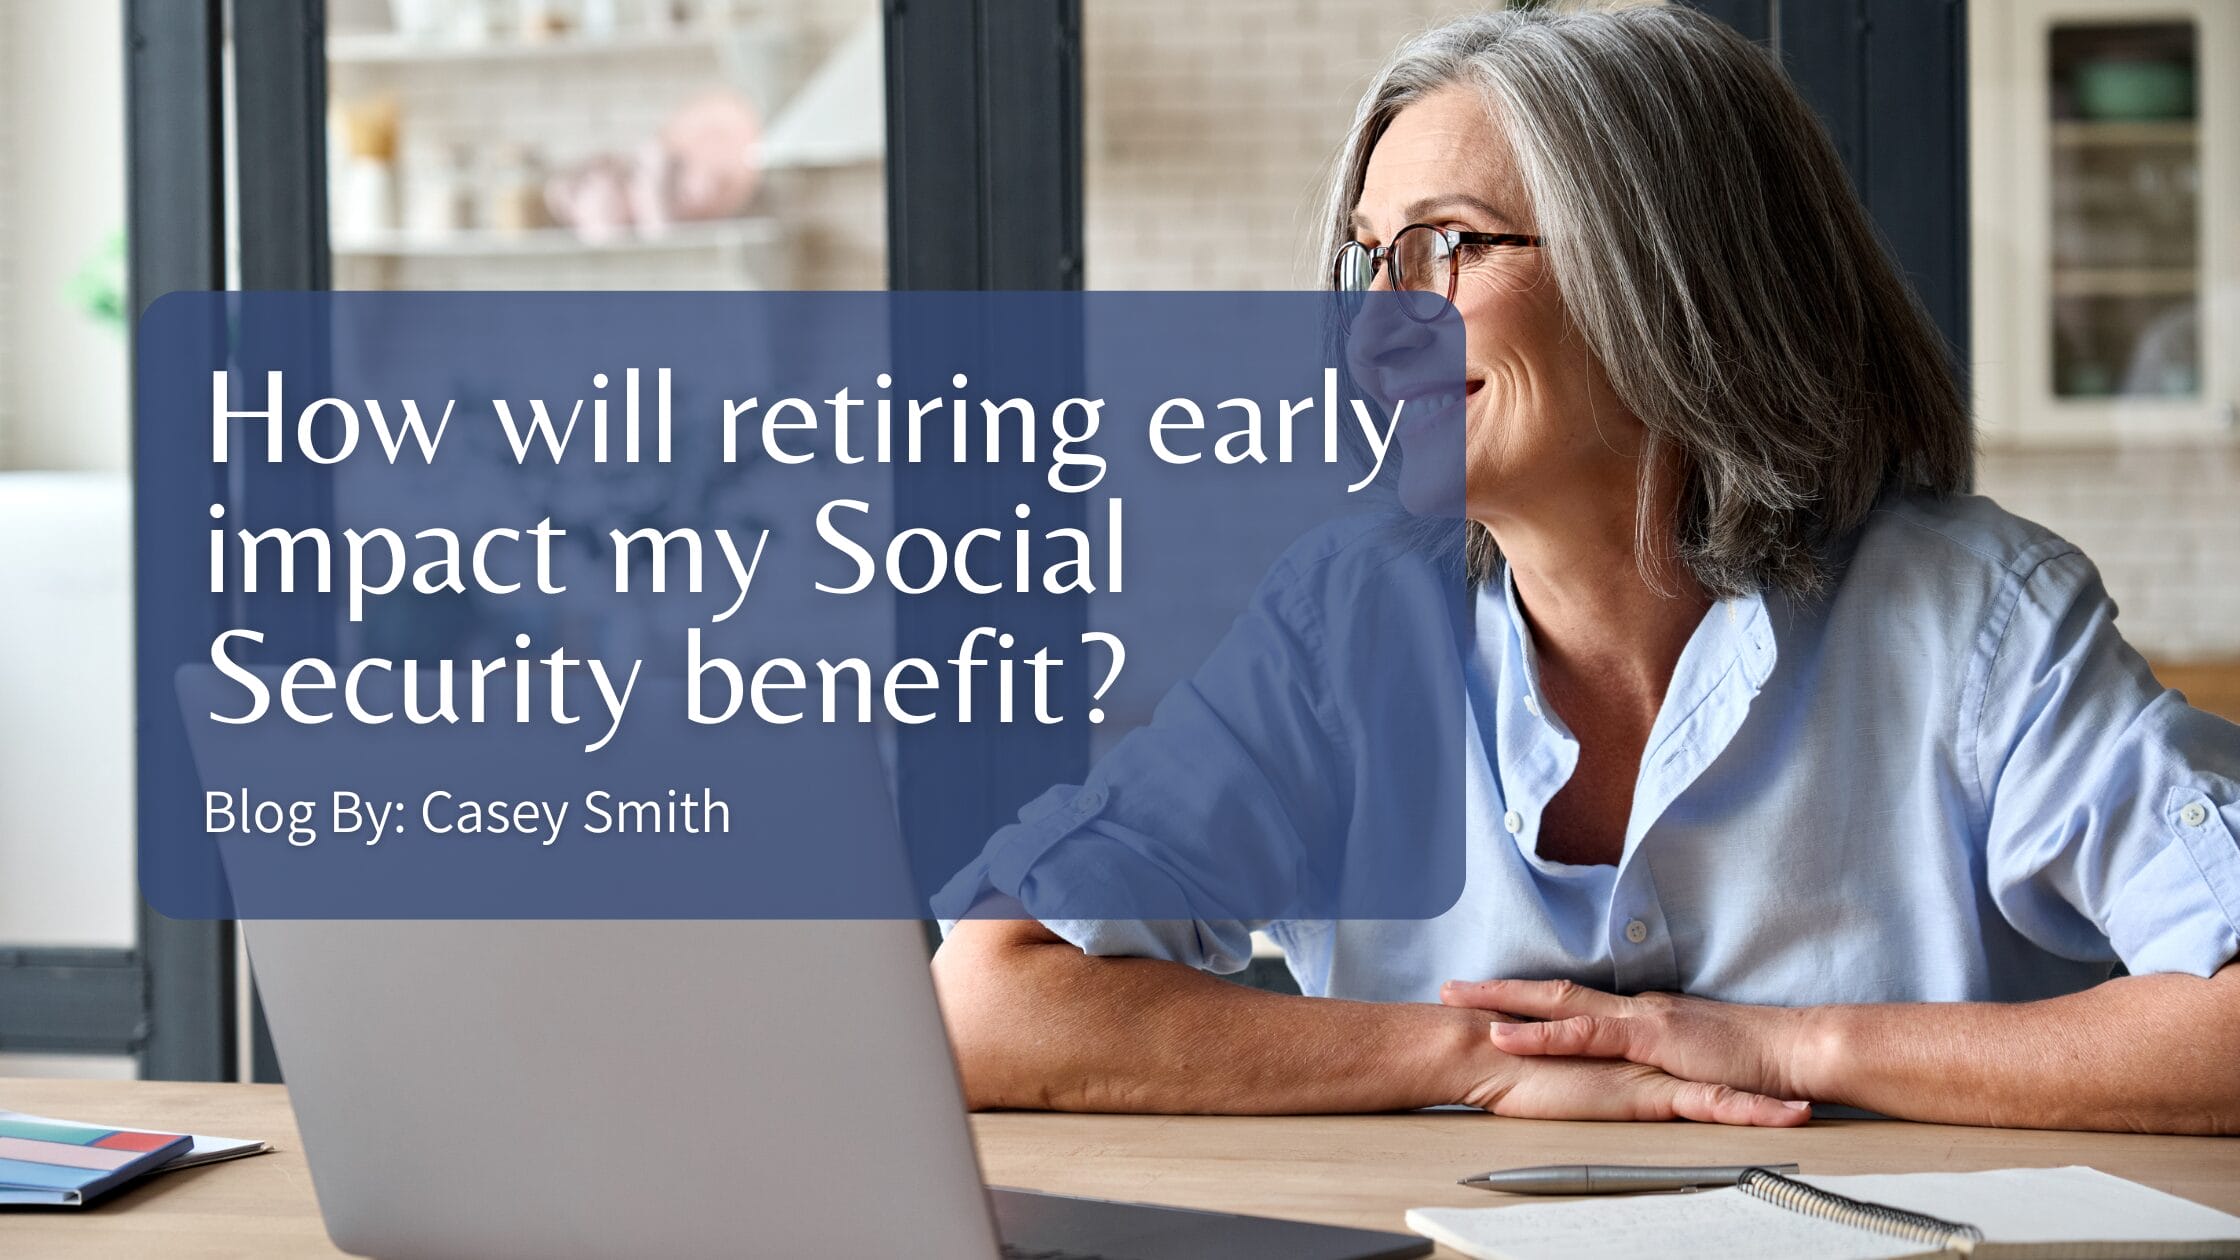 How will retiring early impact my Social Security benefit?